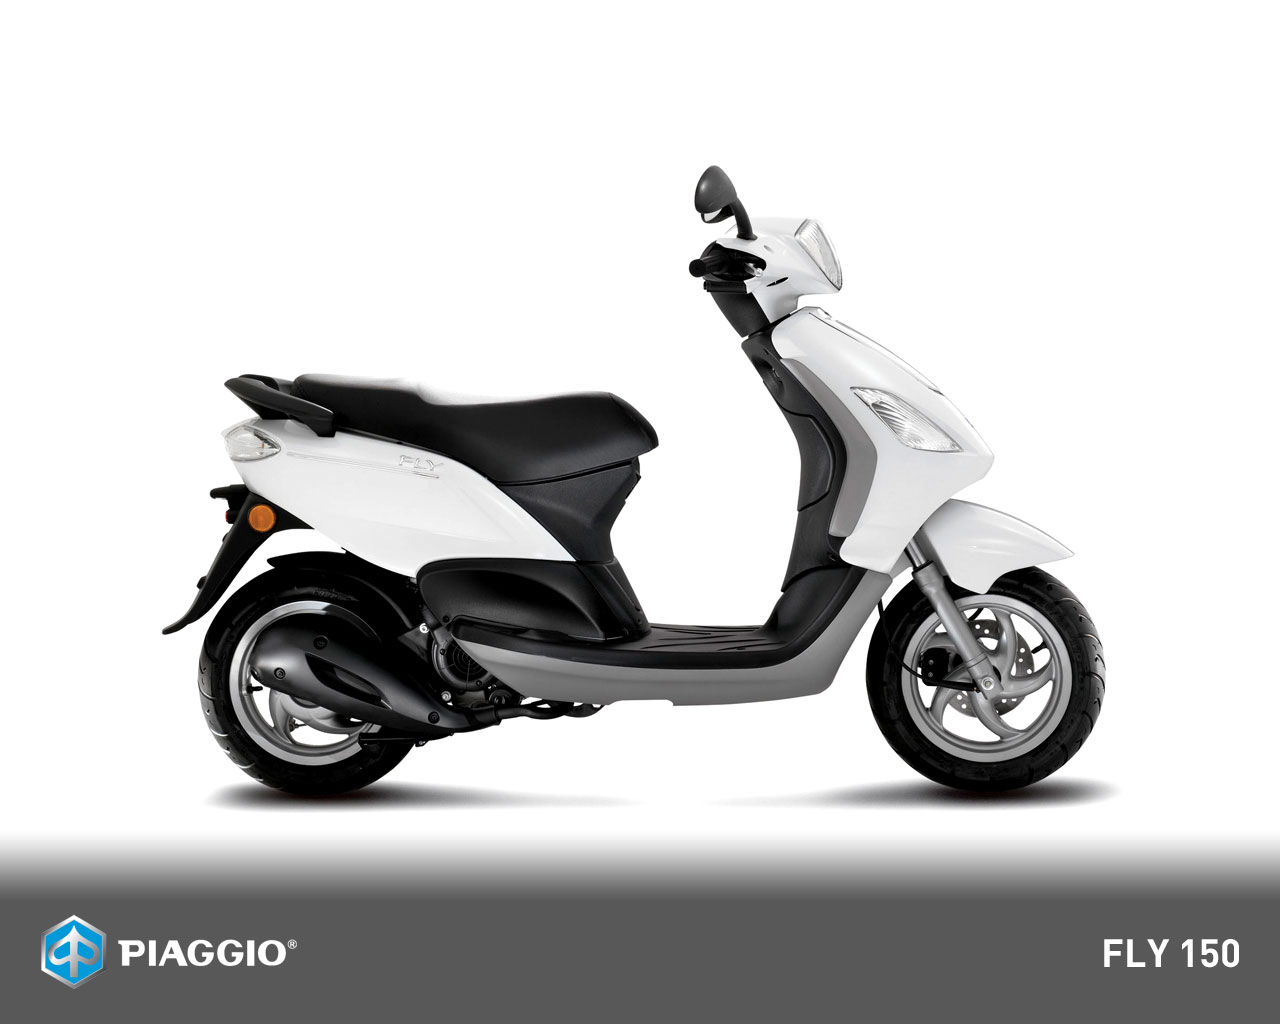 Piaggio Fly 50 4T Fly 50 4T photo - 1